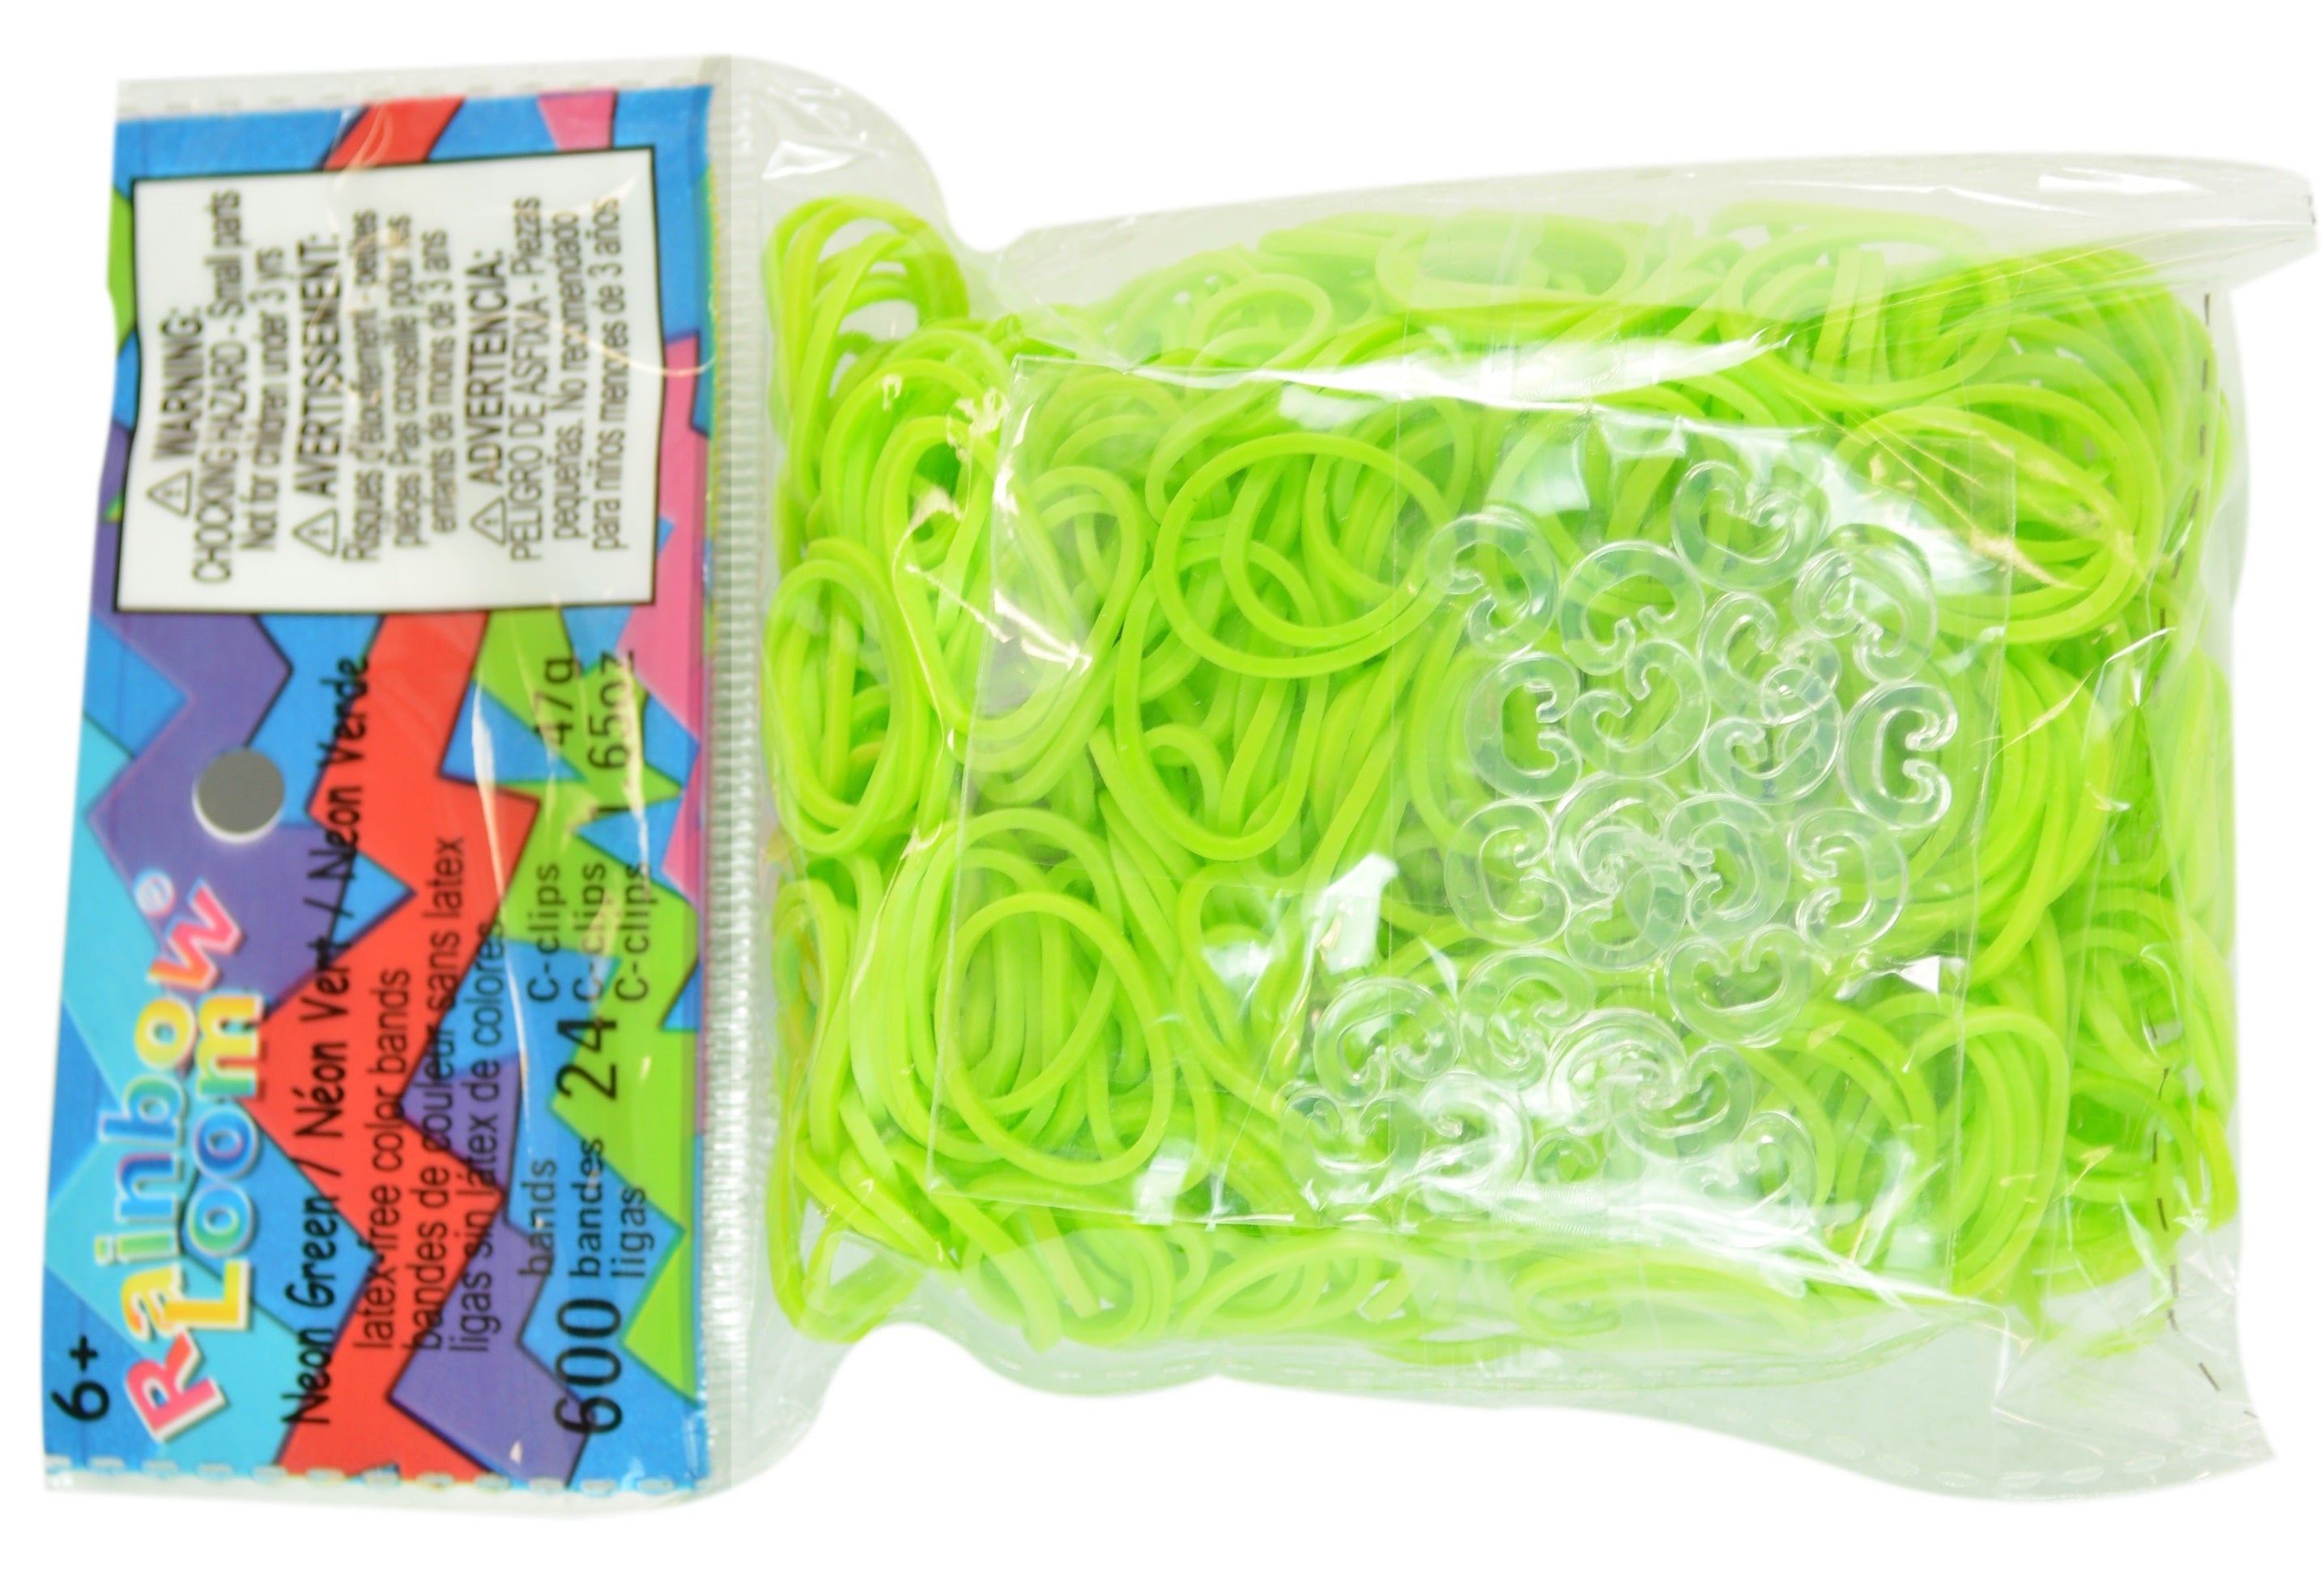 30022878 Darice All Things You Infinity Loom: Plastic - Green - 25.6 x 8.2  x 1.25 inches — S E Simons